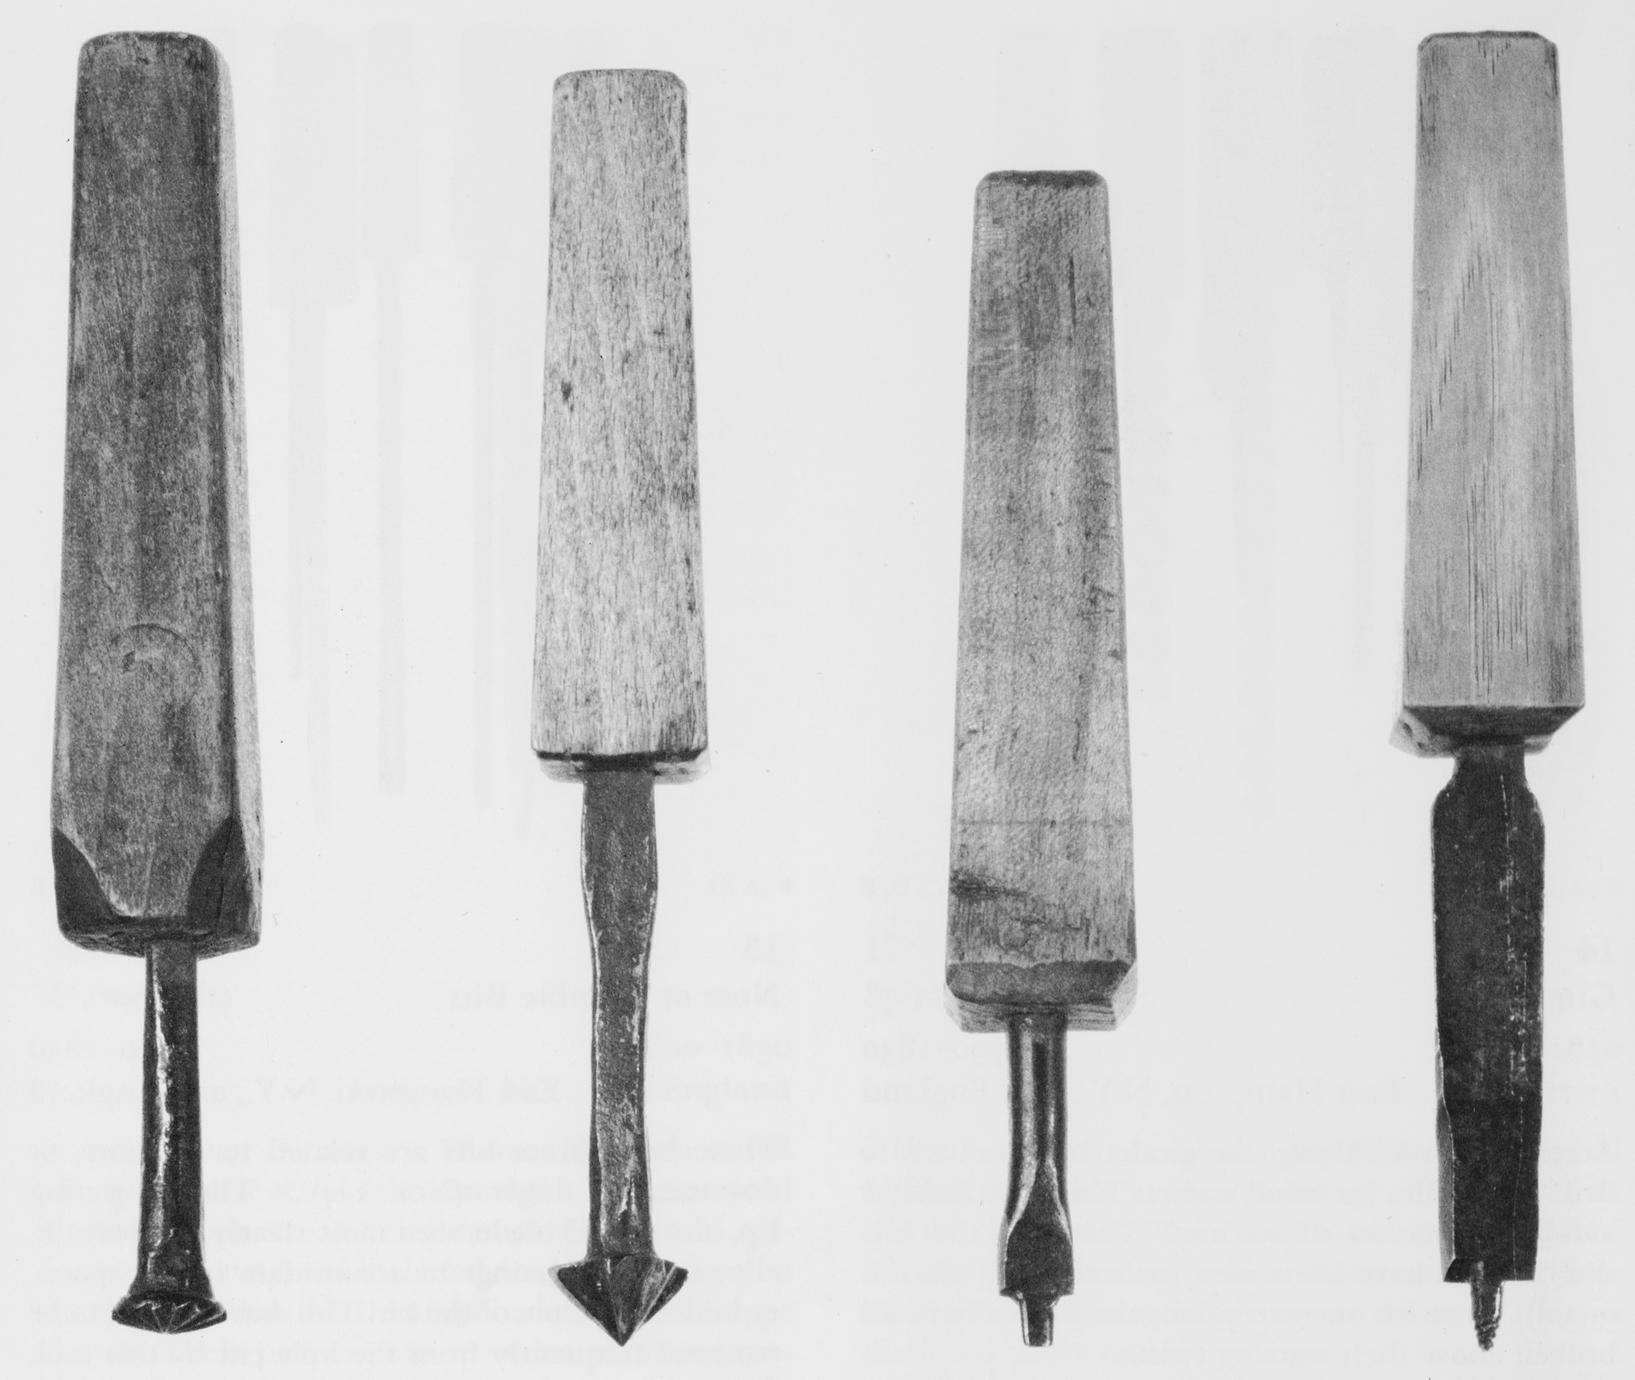 Four examples of different countersink bits.